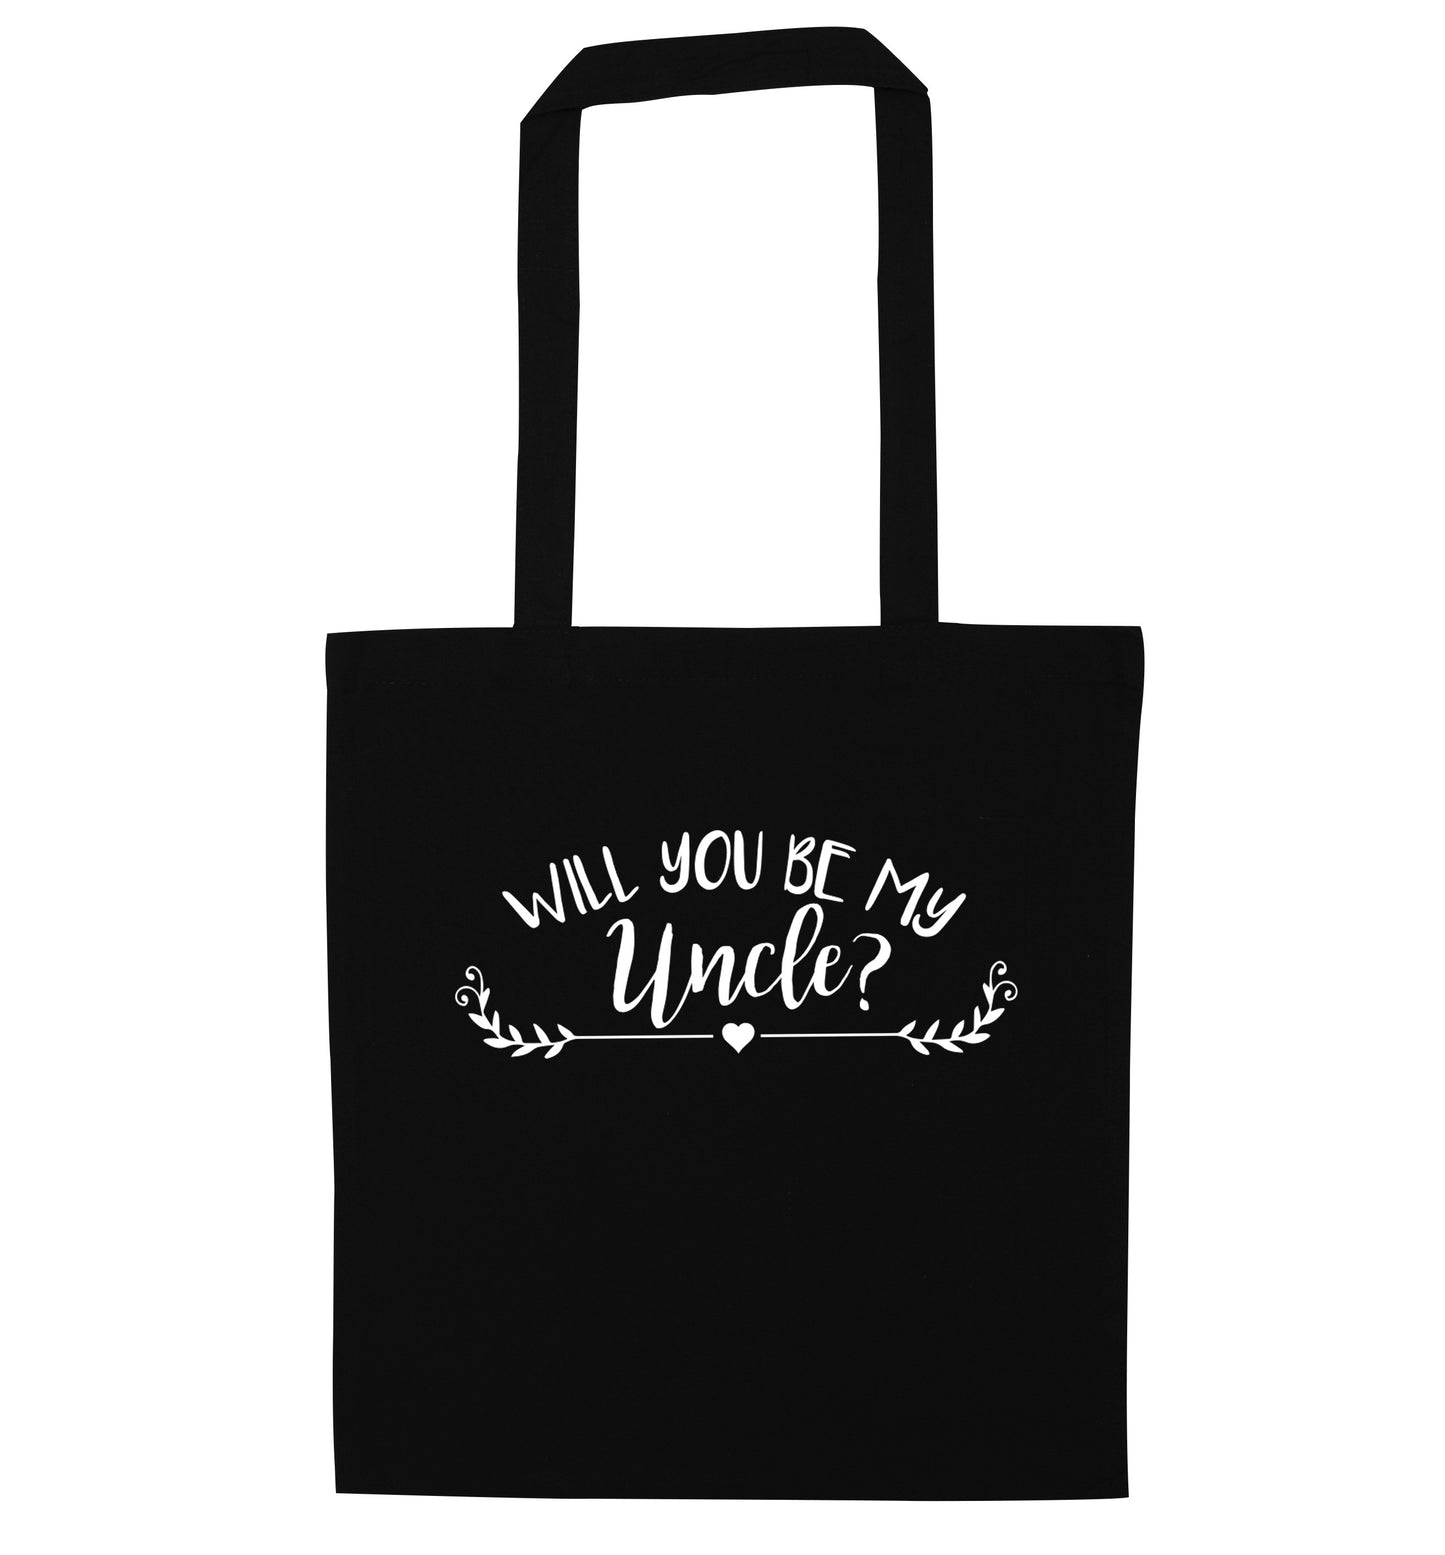 Will you be my uncle? black tote bag